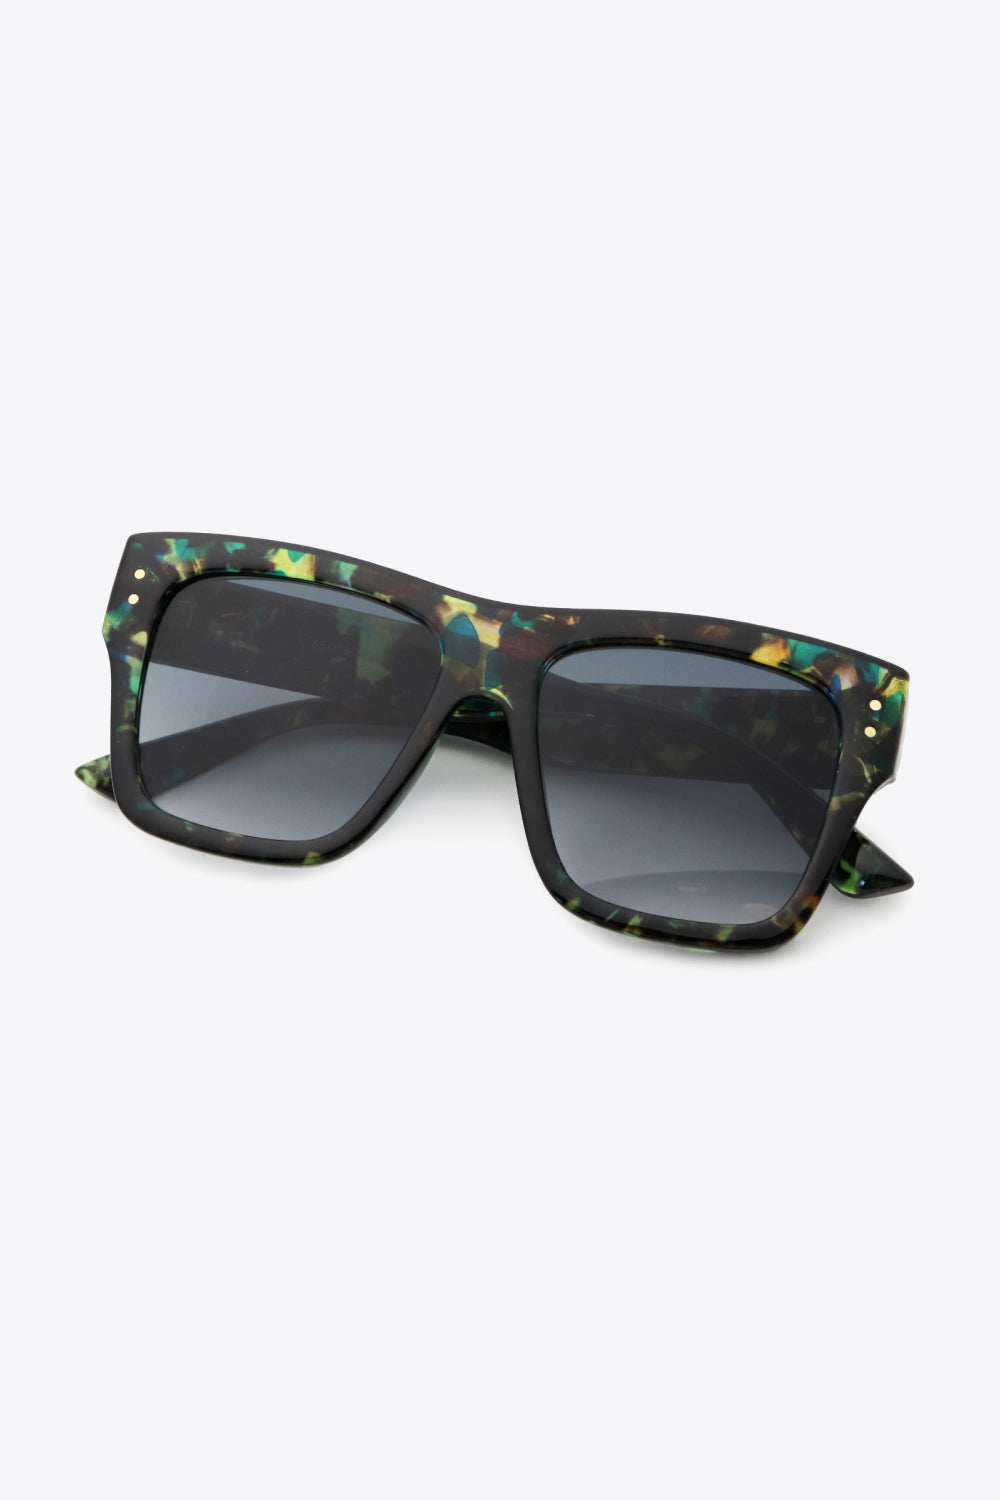 UV400 Patterned Polycarbonate Square Sunglasses - Sunglasses - FITGGINS